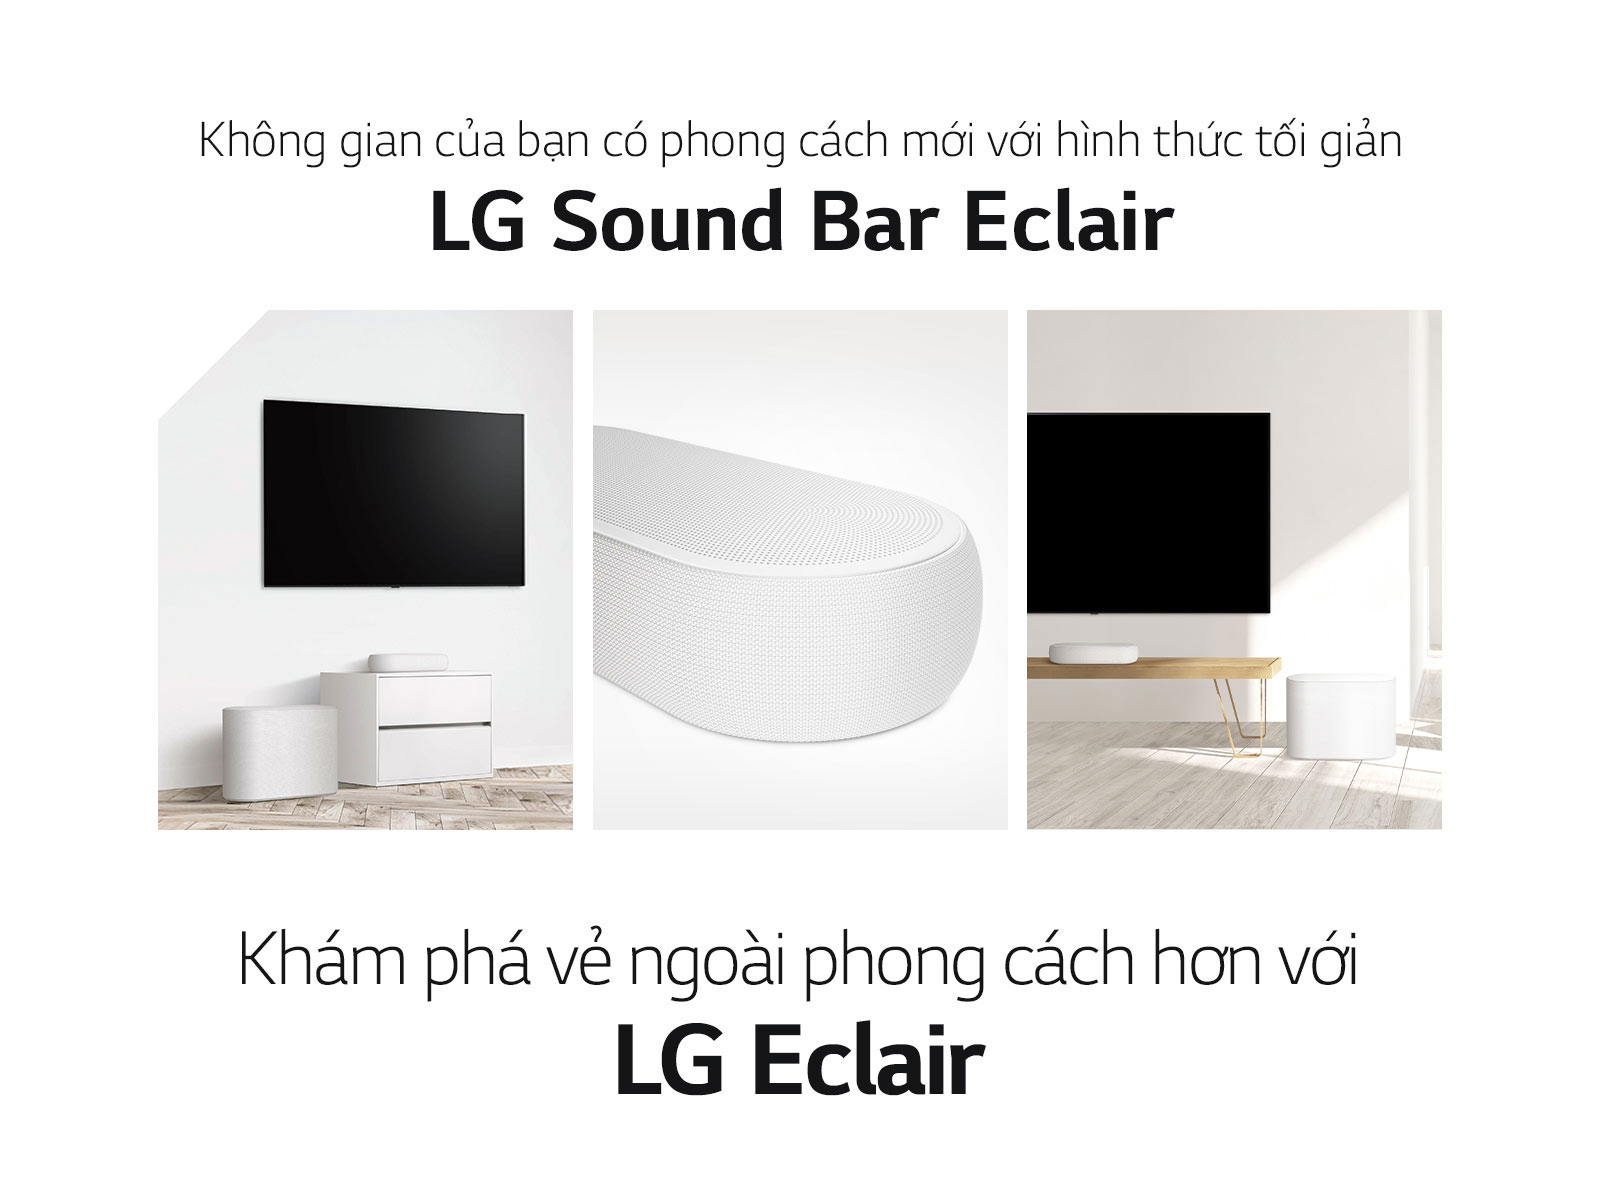 There is a collage of three images - soundbar and subwoofer in a white living room on the left side, close-up of a right side of soundbar in the middle, and soundbar and subwoofer placed on a wooden cabinet on the right side of a collage image.